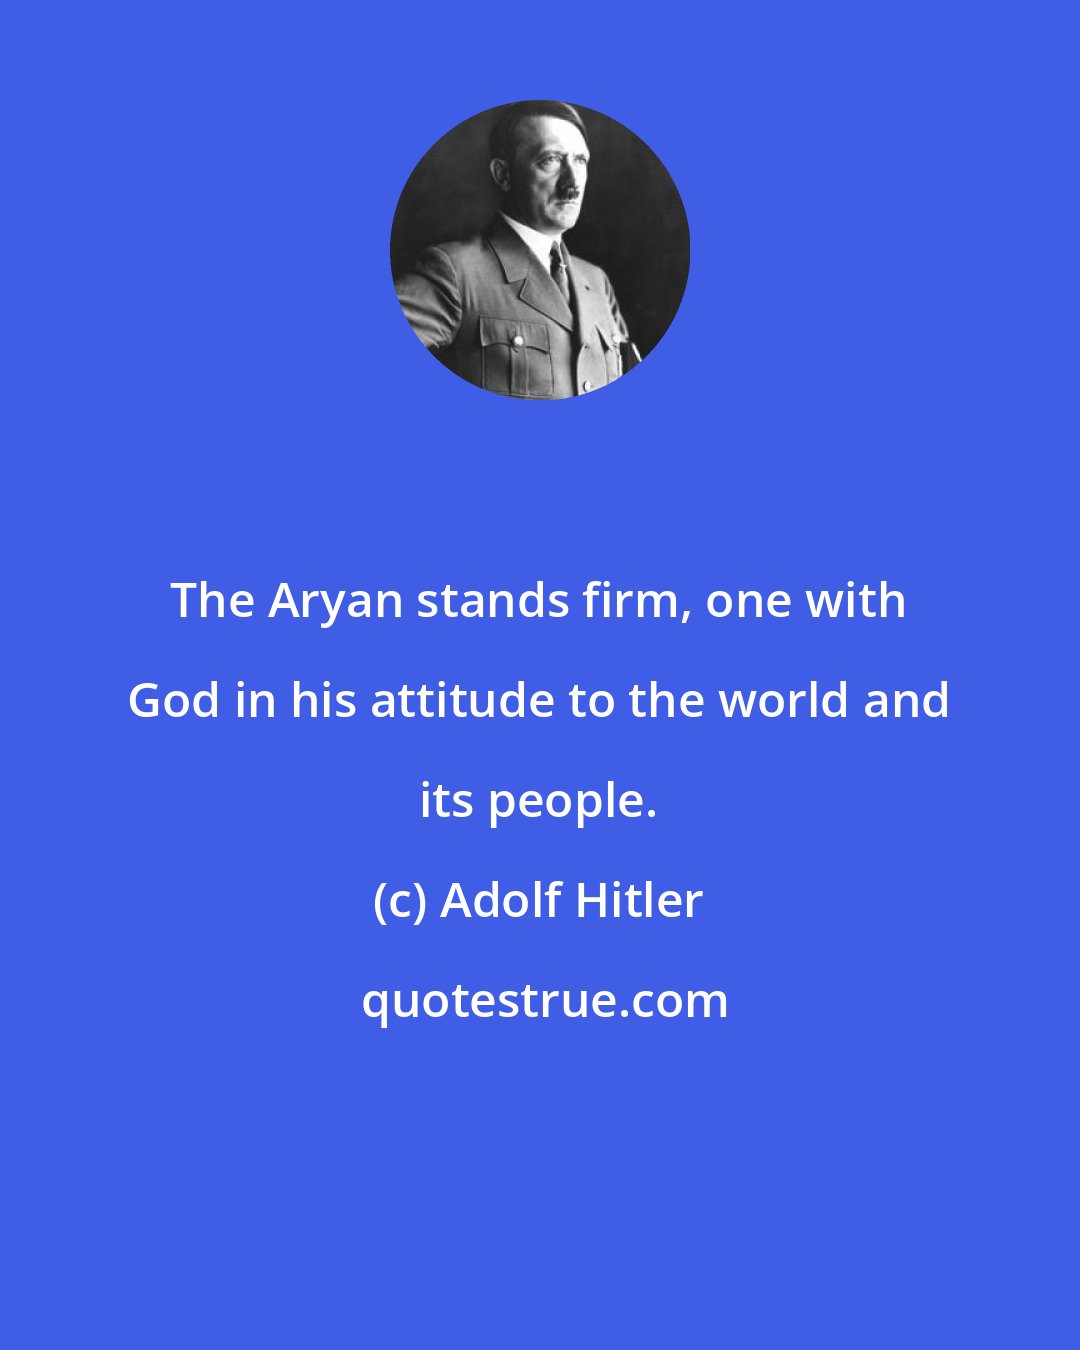 Adolf Hitler: The Aryan stands firm, one with God in his attitude to the world and its people.